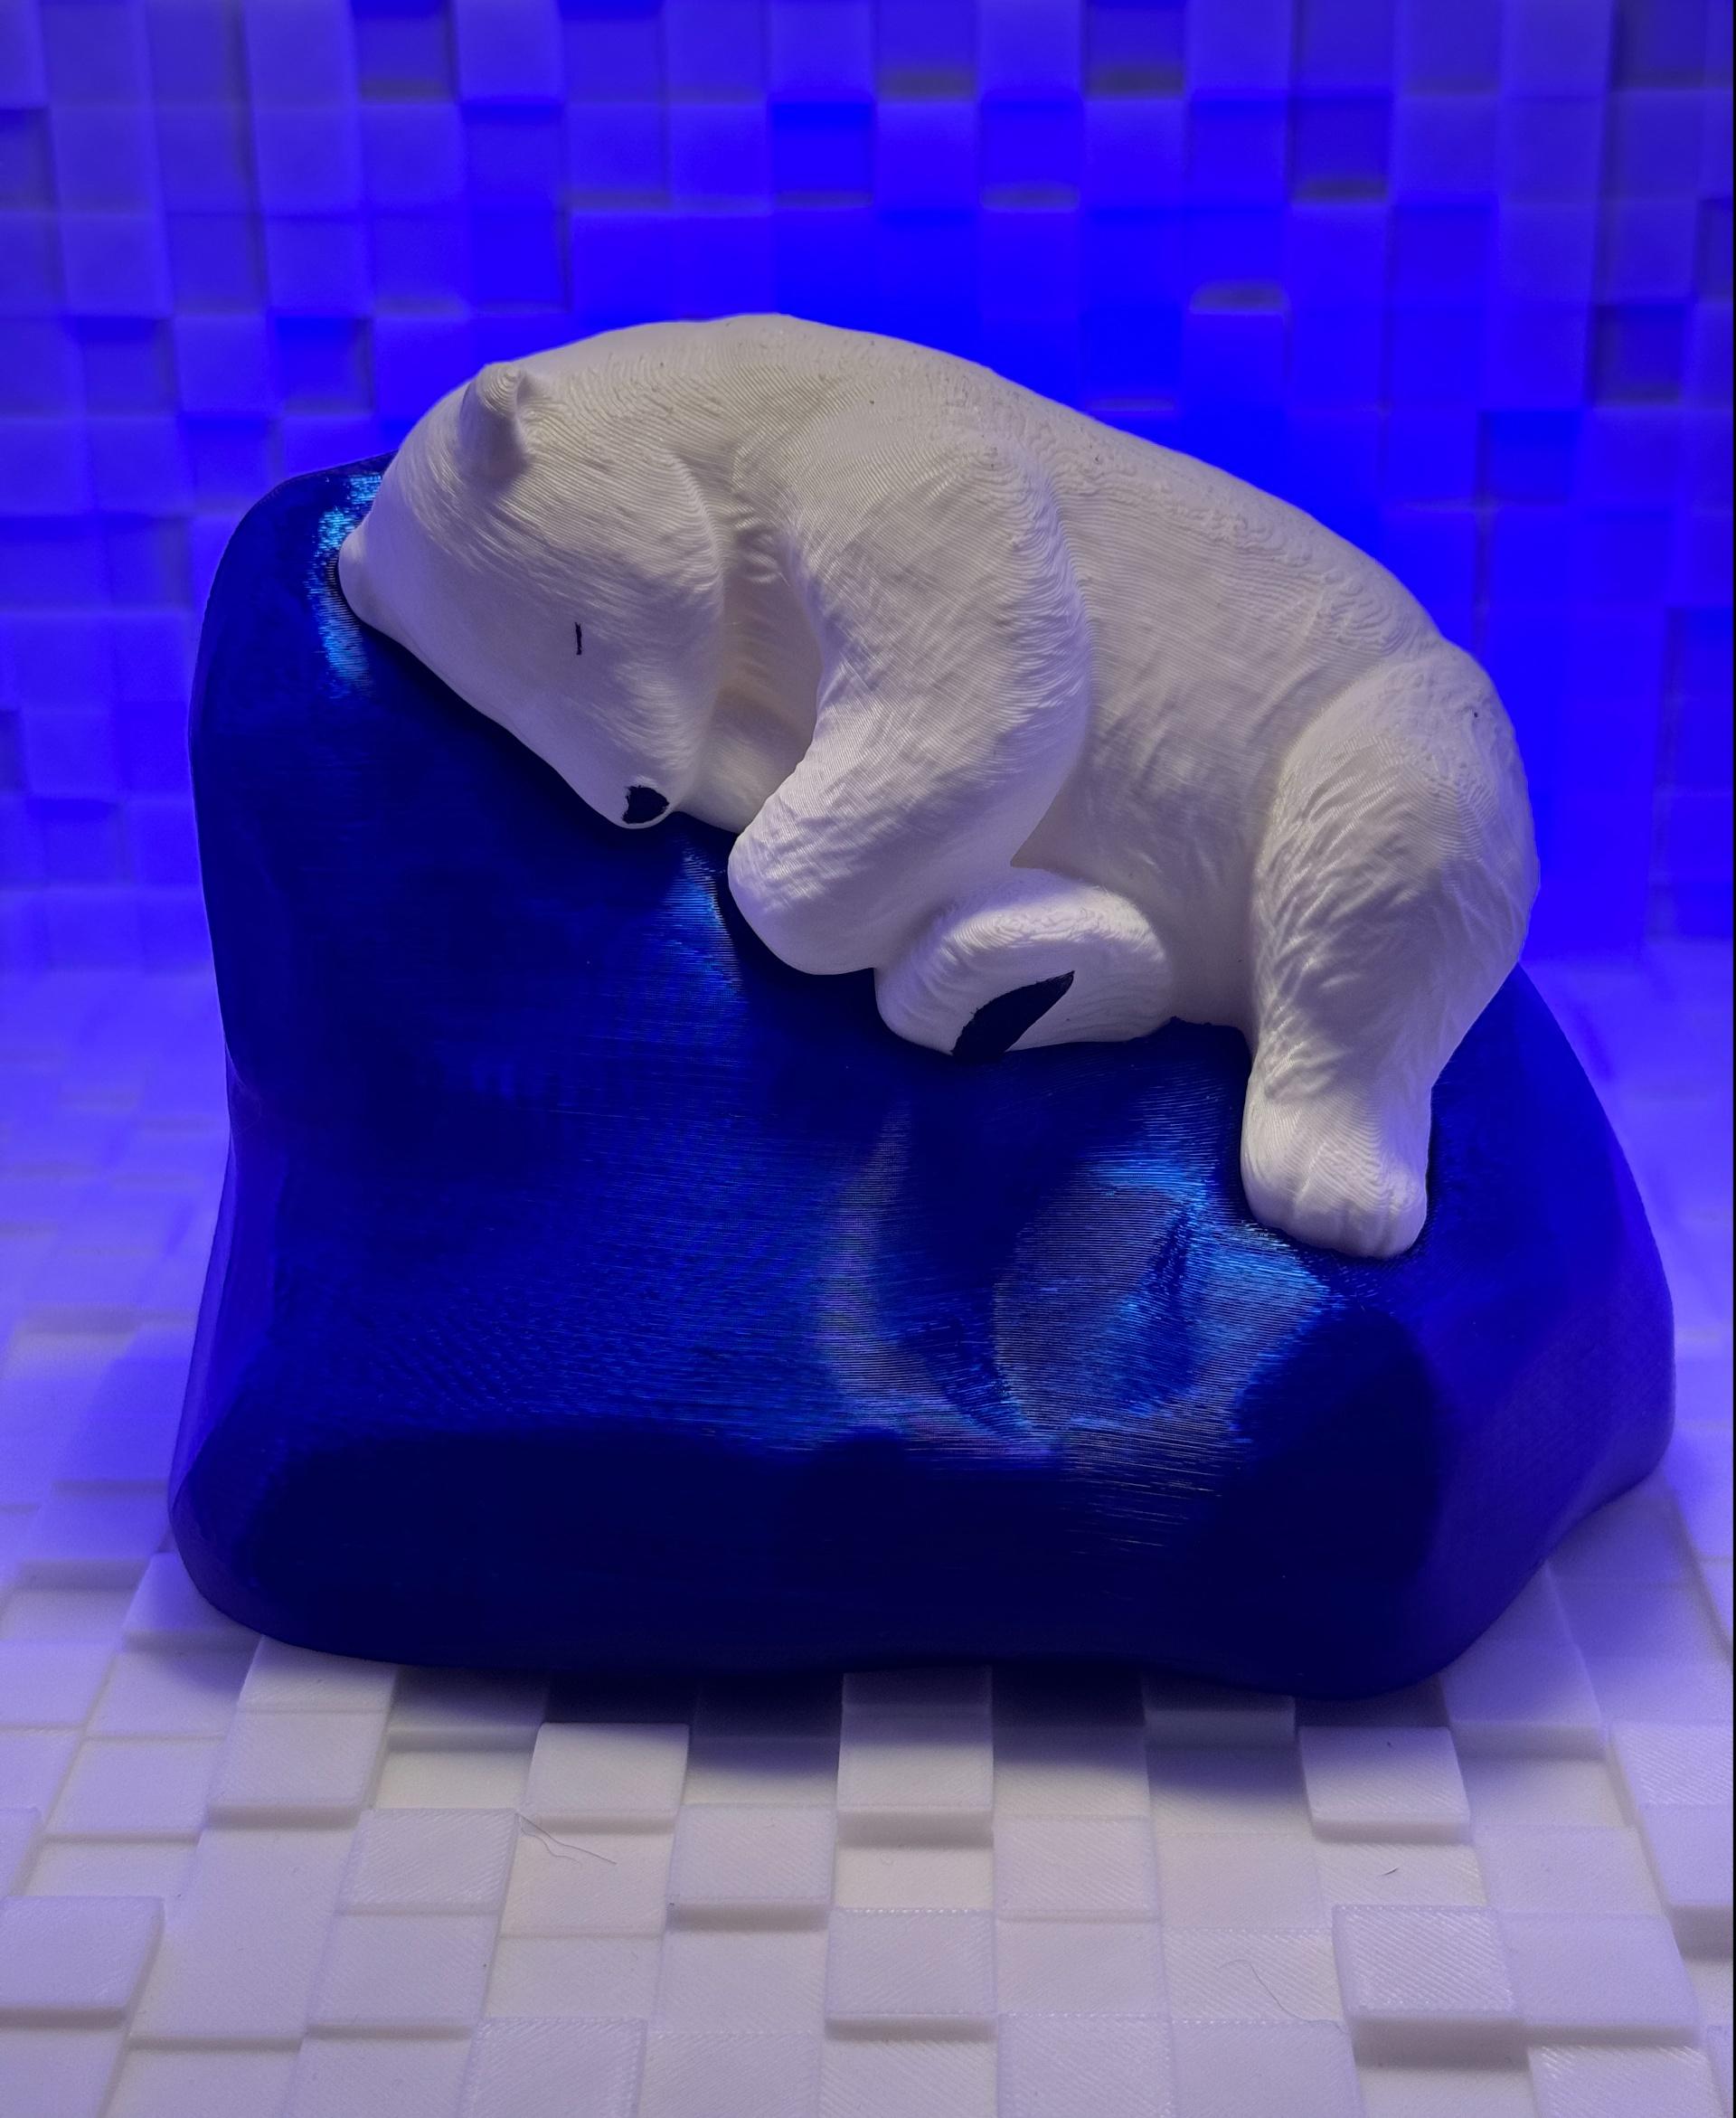 Sleeping Polar Bear - The iceberg was printed in Polymaker Translucent Blue PETG, the bear in Polymaker Polylite White PLA, and I hand-painted the pad on the foot, the nose, and the eye slit with black acrylic paint.

Such a cute model! - 3d model